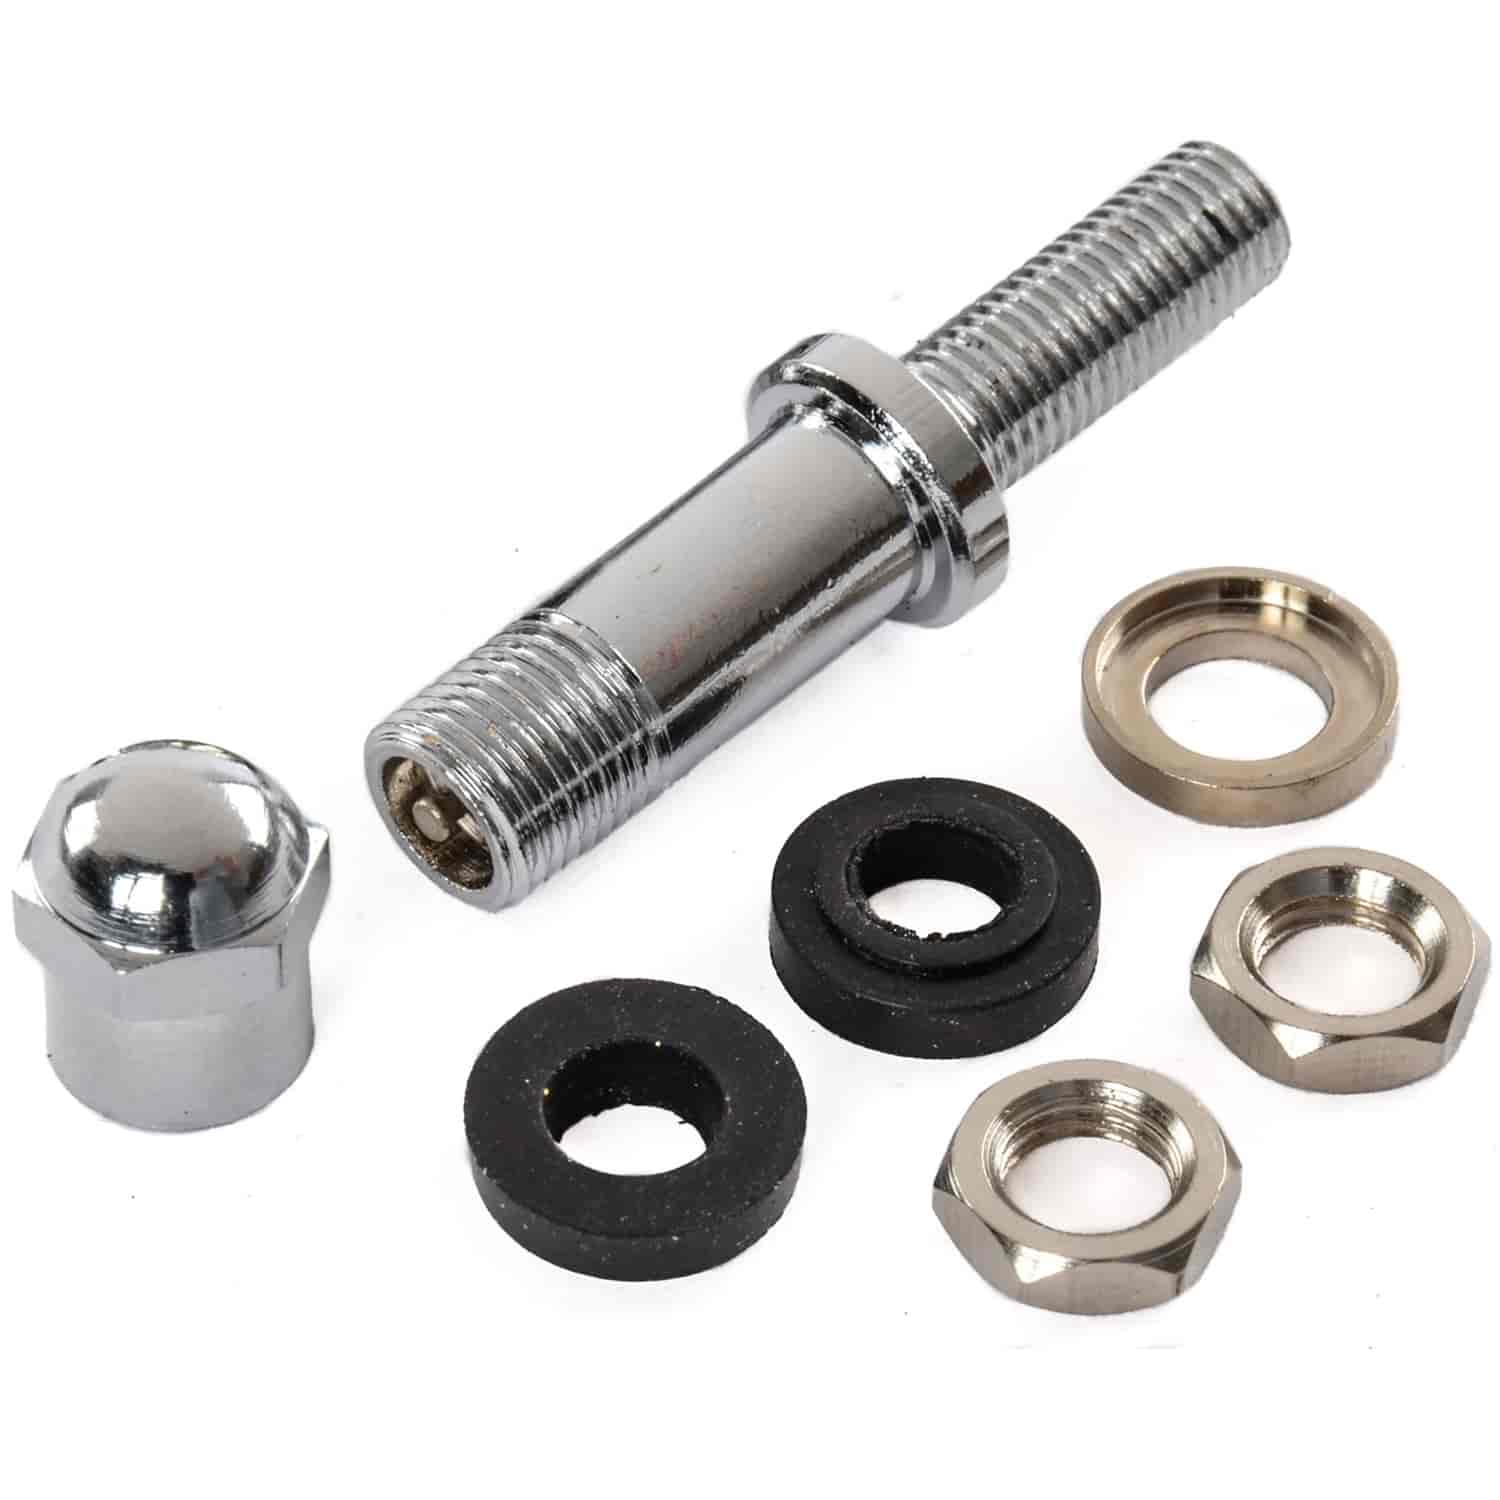 Valve Stems For Spindle Mount Wheels